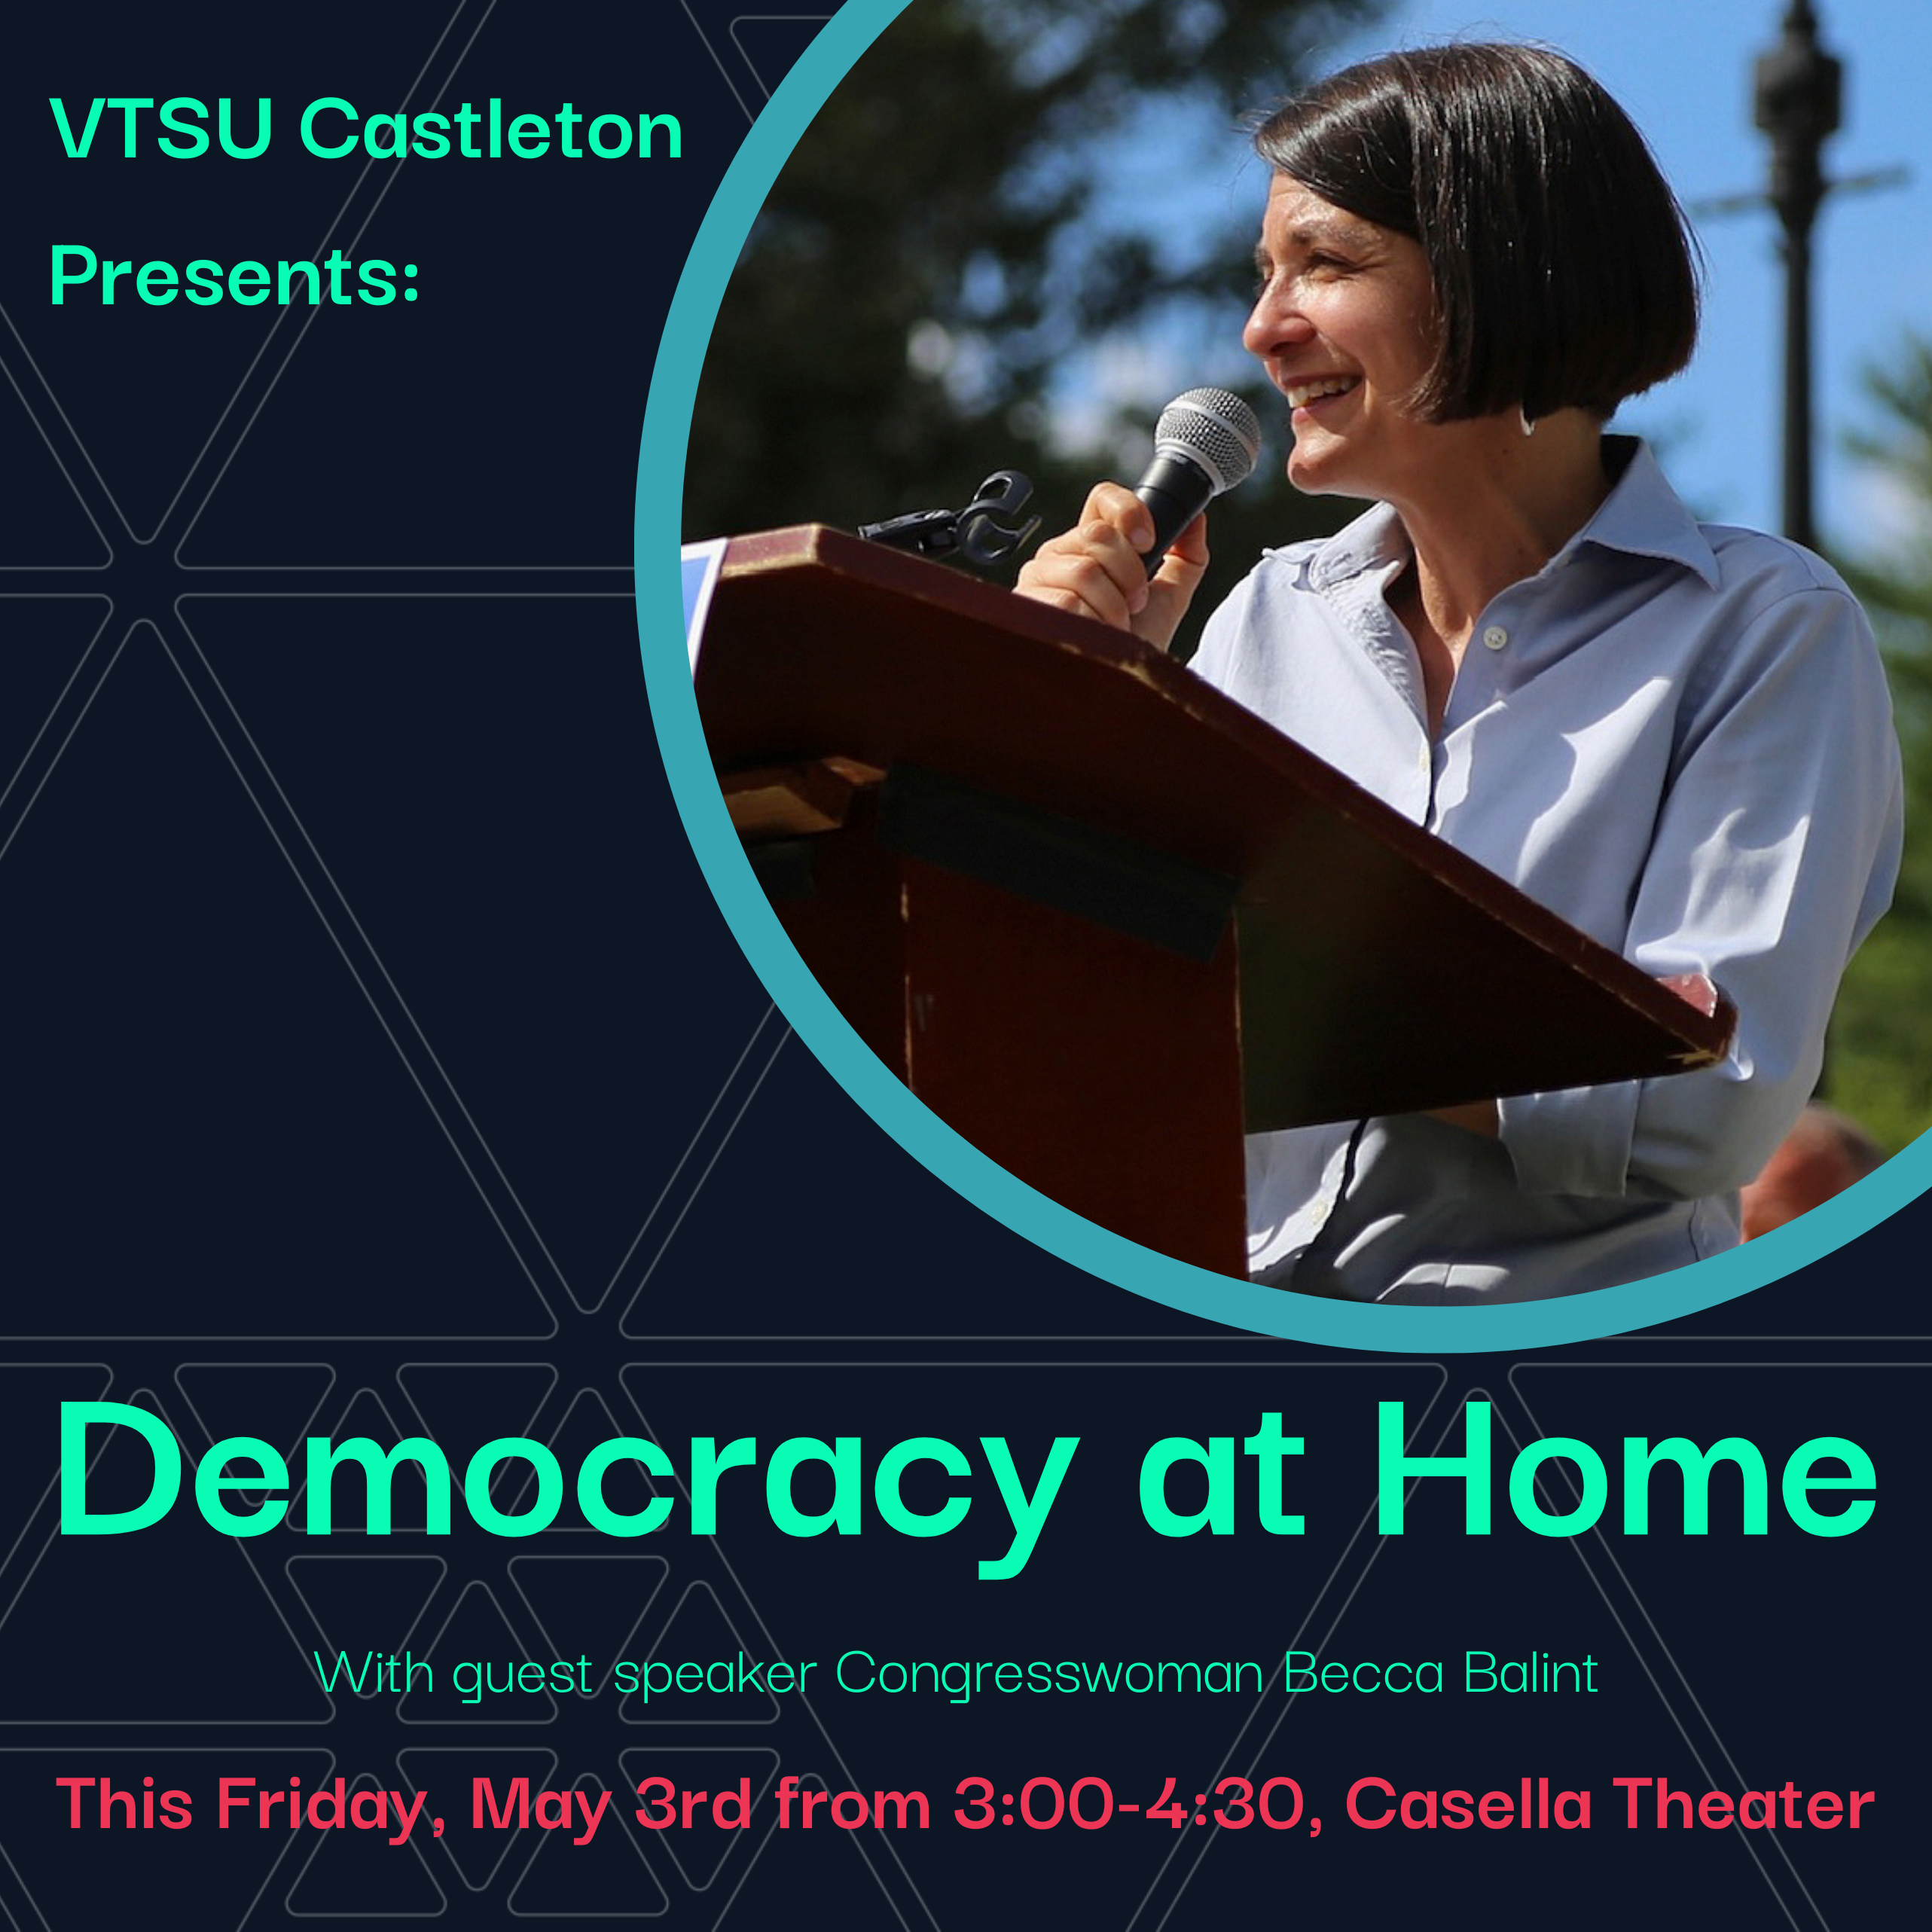 Democracy at Home!

Friday, May 3rd

3-4:30 pm | Casella Theater

As a way of celebrating the unique community within Vermont, please join Congresswoman Becca Balint as she discusses issues of importance to the Castleton community.

 From discussing the role women play in politics to mental health among young Americans to the health of US democracy, we are excited to have Congresswoman Balint share her thoughts with all of you! 

This event is open to students, faculty, staff, and community members.